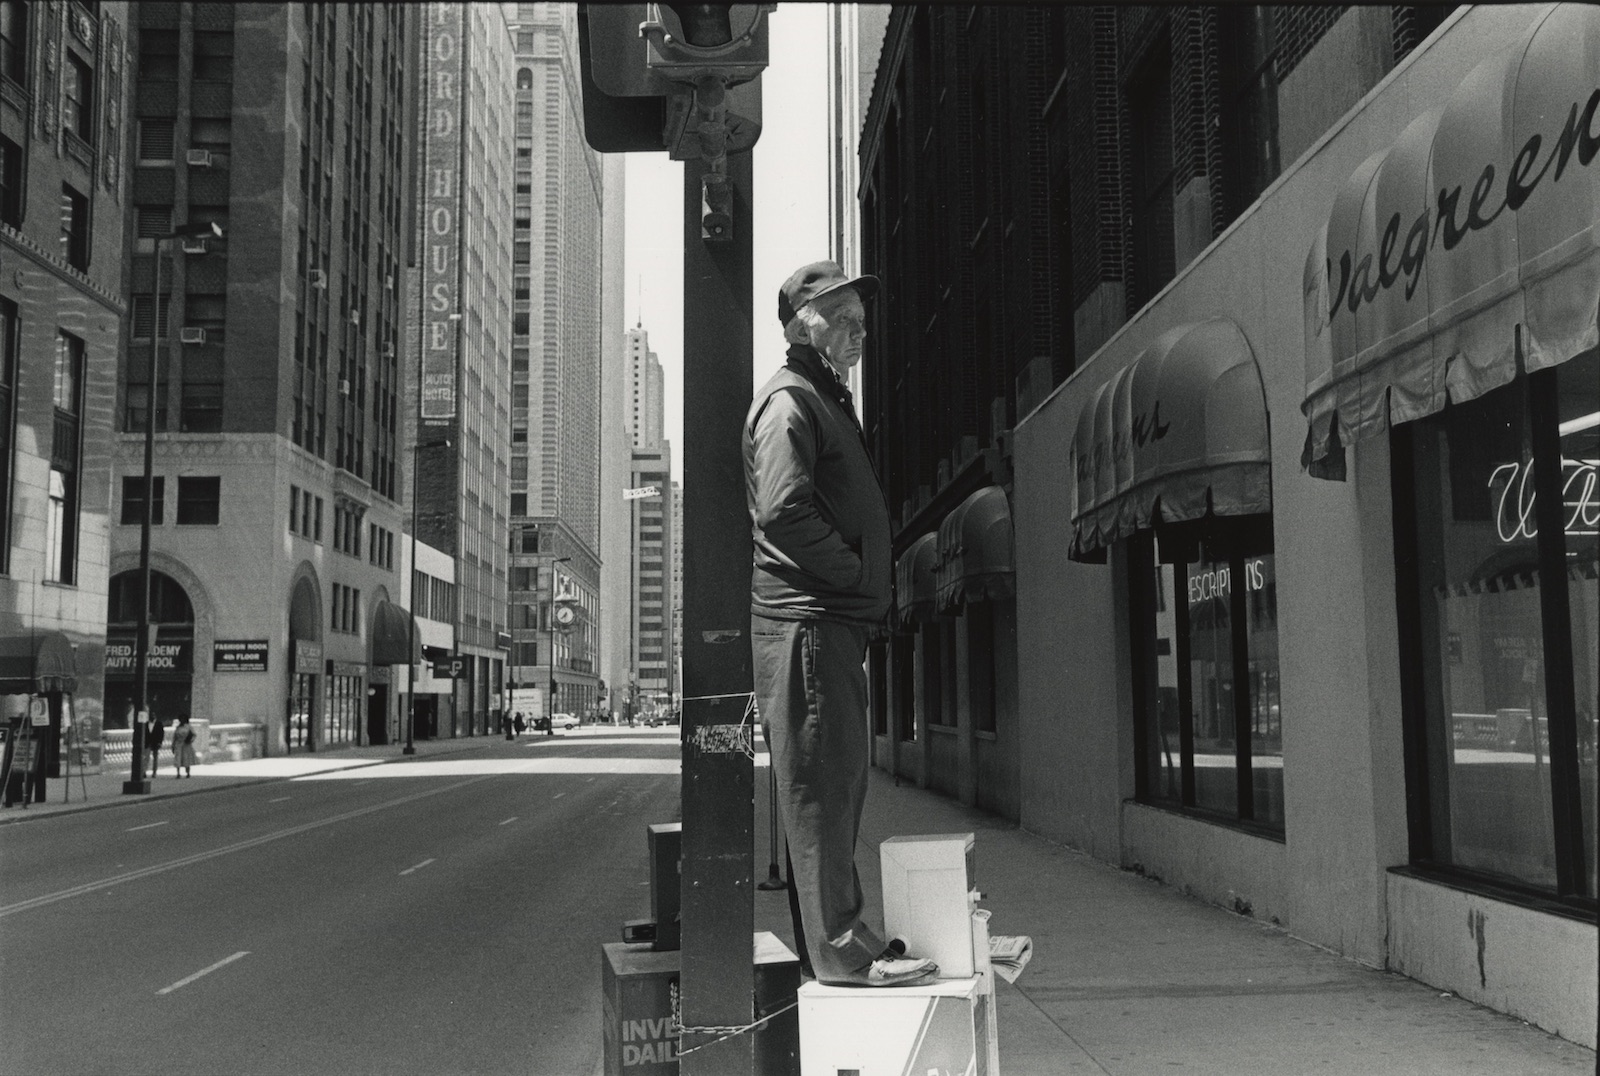 Man on a newspaper stand, Chicago, 1987